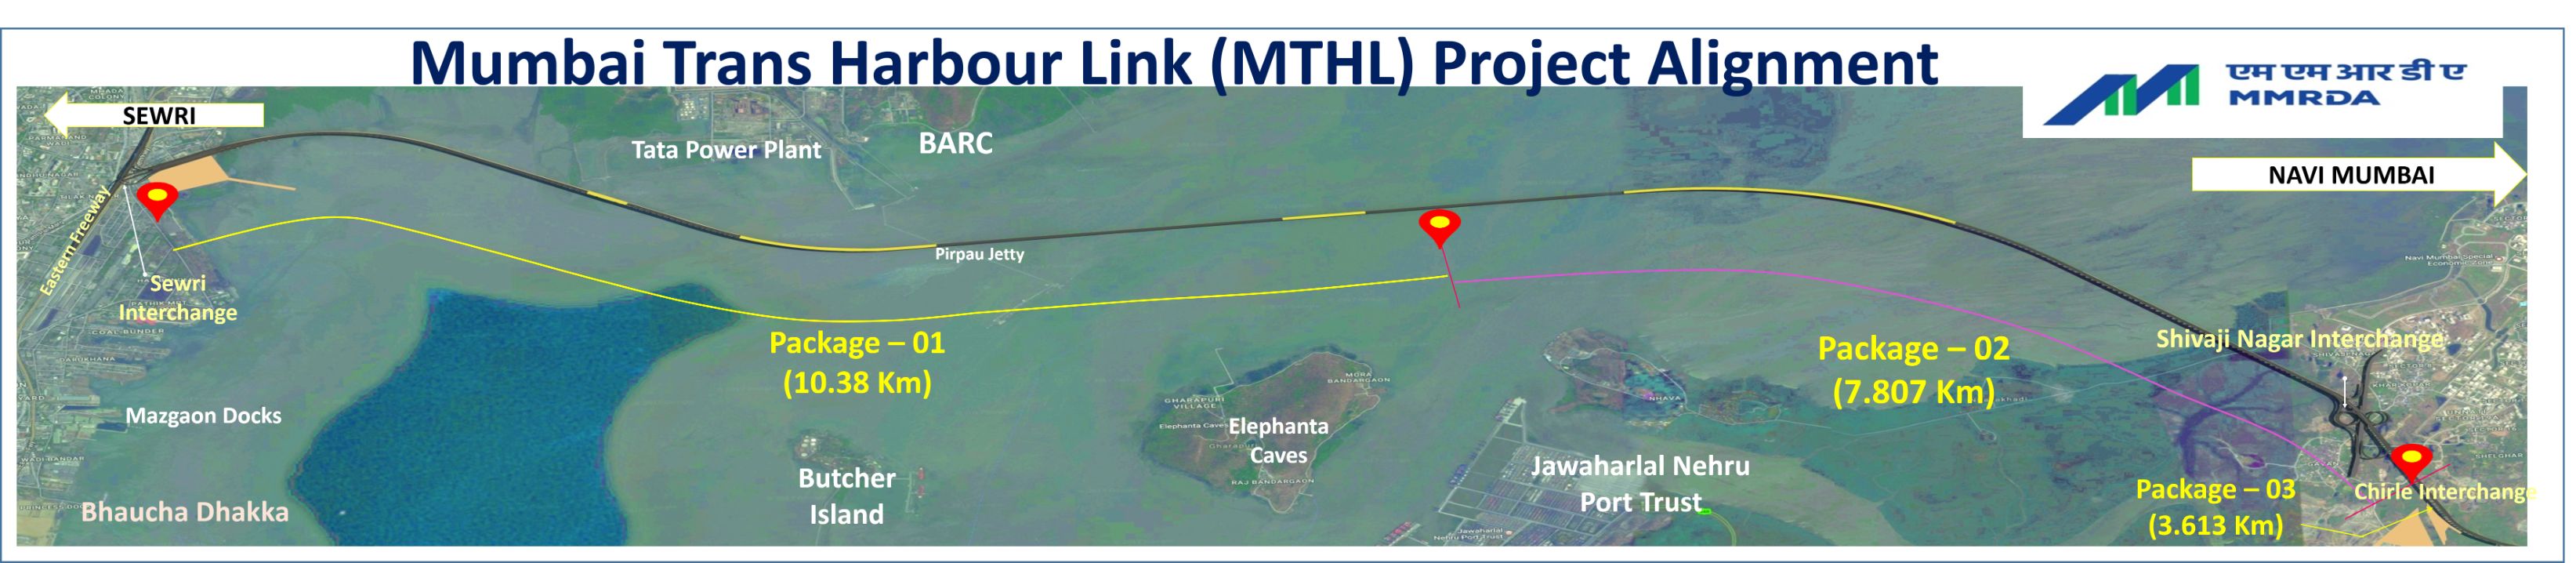 Mumbai Trans Harbour Link Latest News, Route Map, & Real Estate Impact